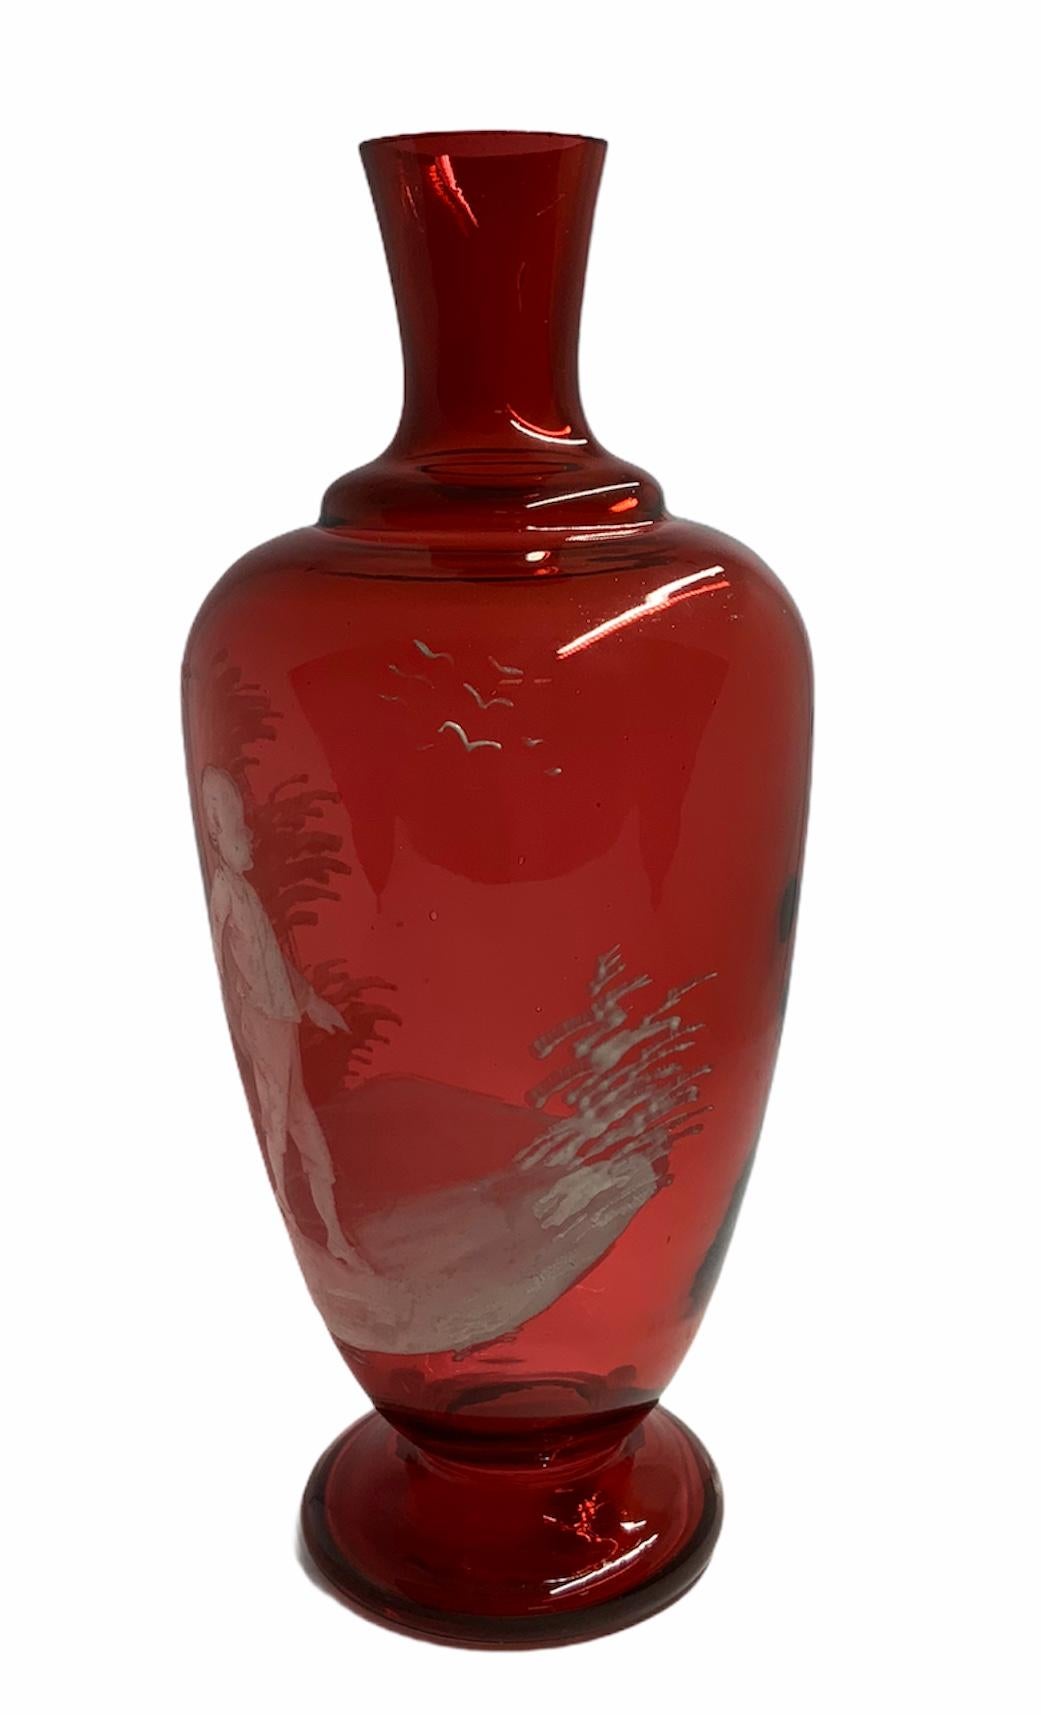 This is Mary Gregory Red glass vase with round pedestal base. It is depicting a white enamel painting of a boy holding a branch with a flower in the right hand.